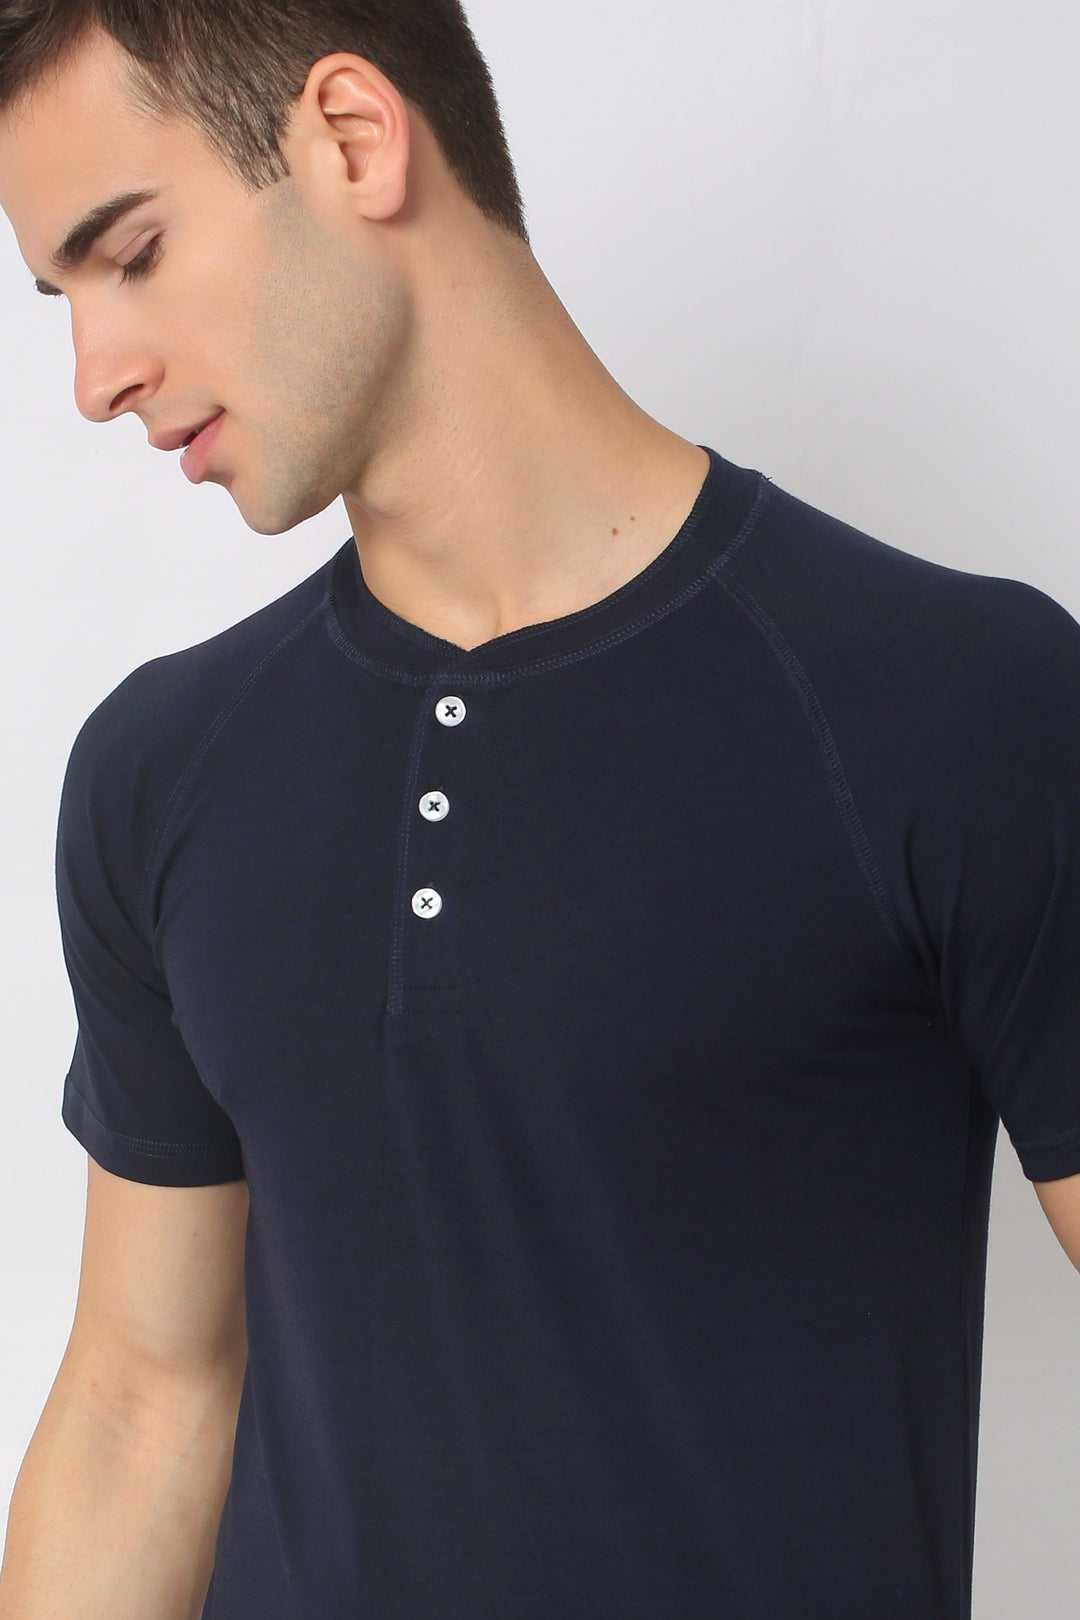 Why Henleys are the Best Closet Staple